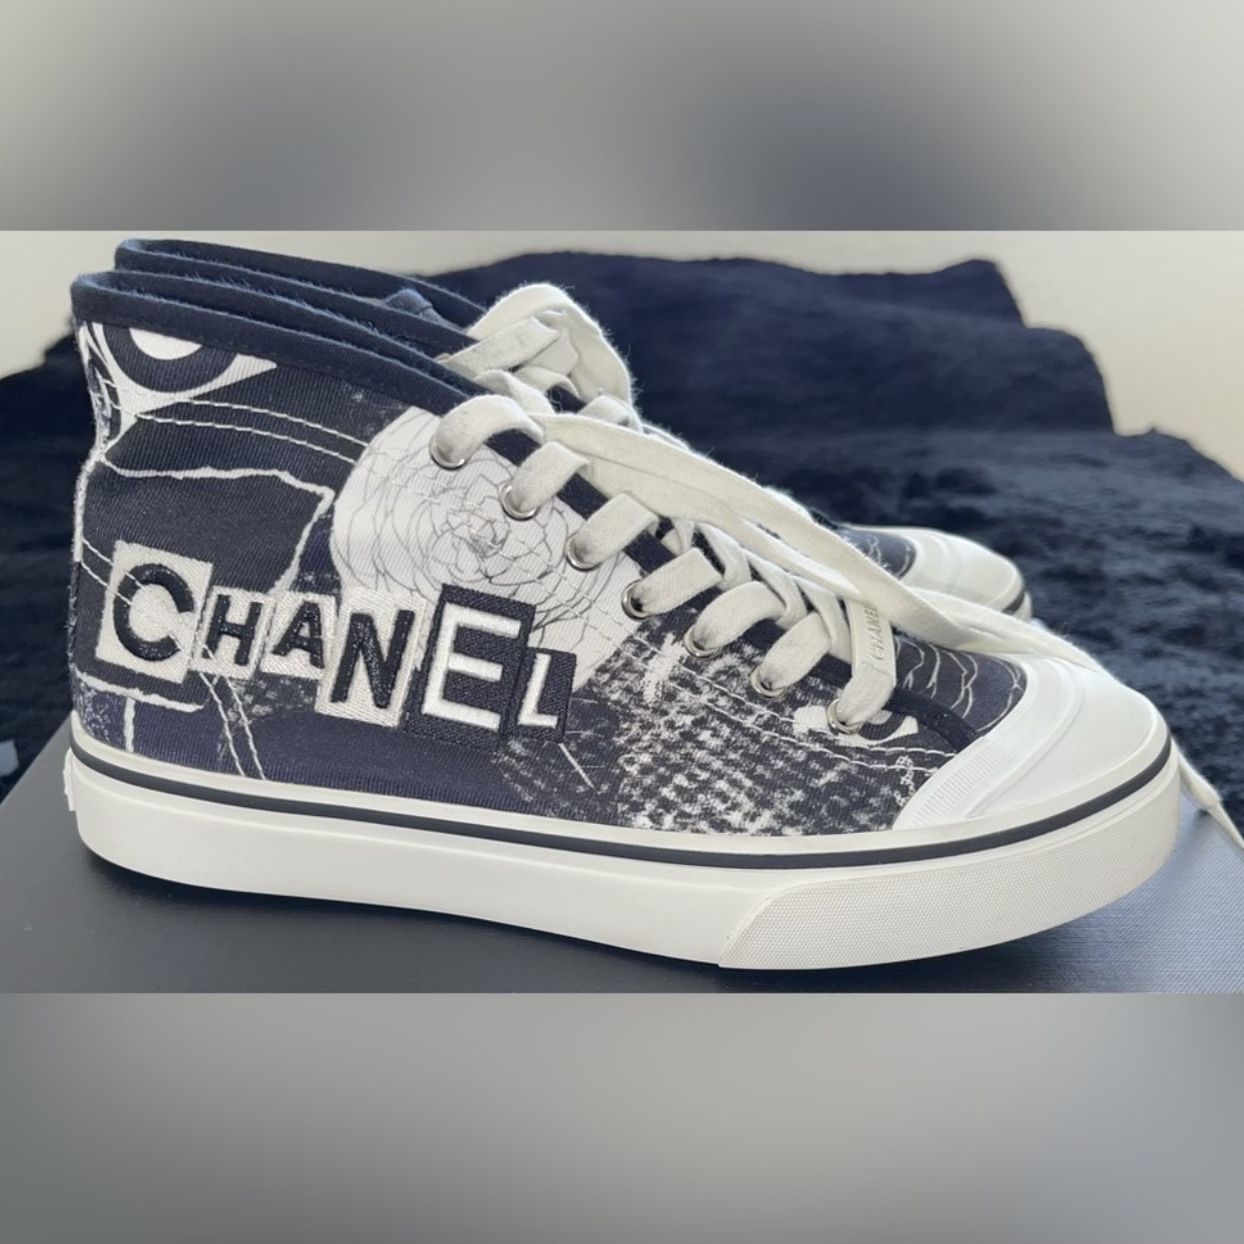 Chanel Sneakers for Sale in Beverly Hills, CA - OfferUp